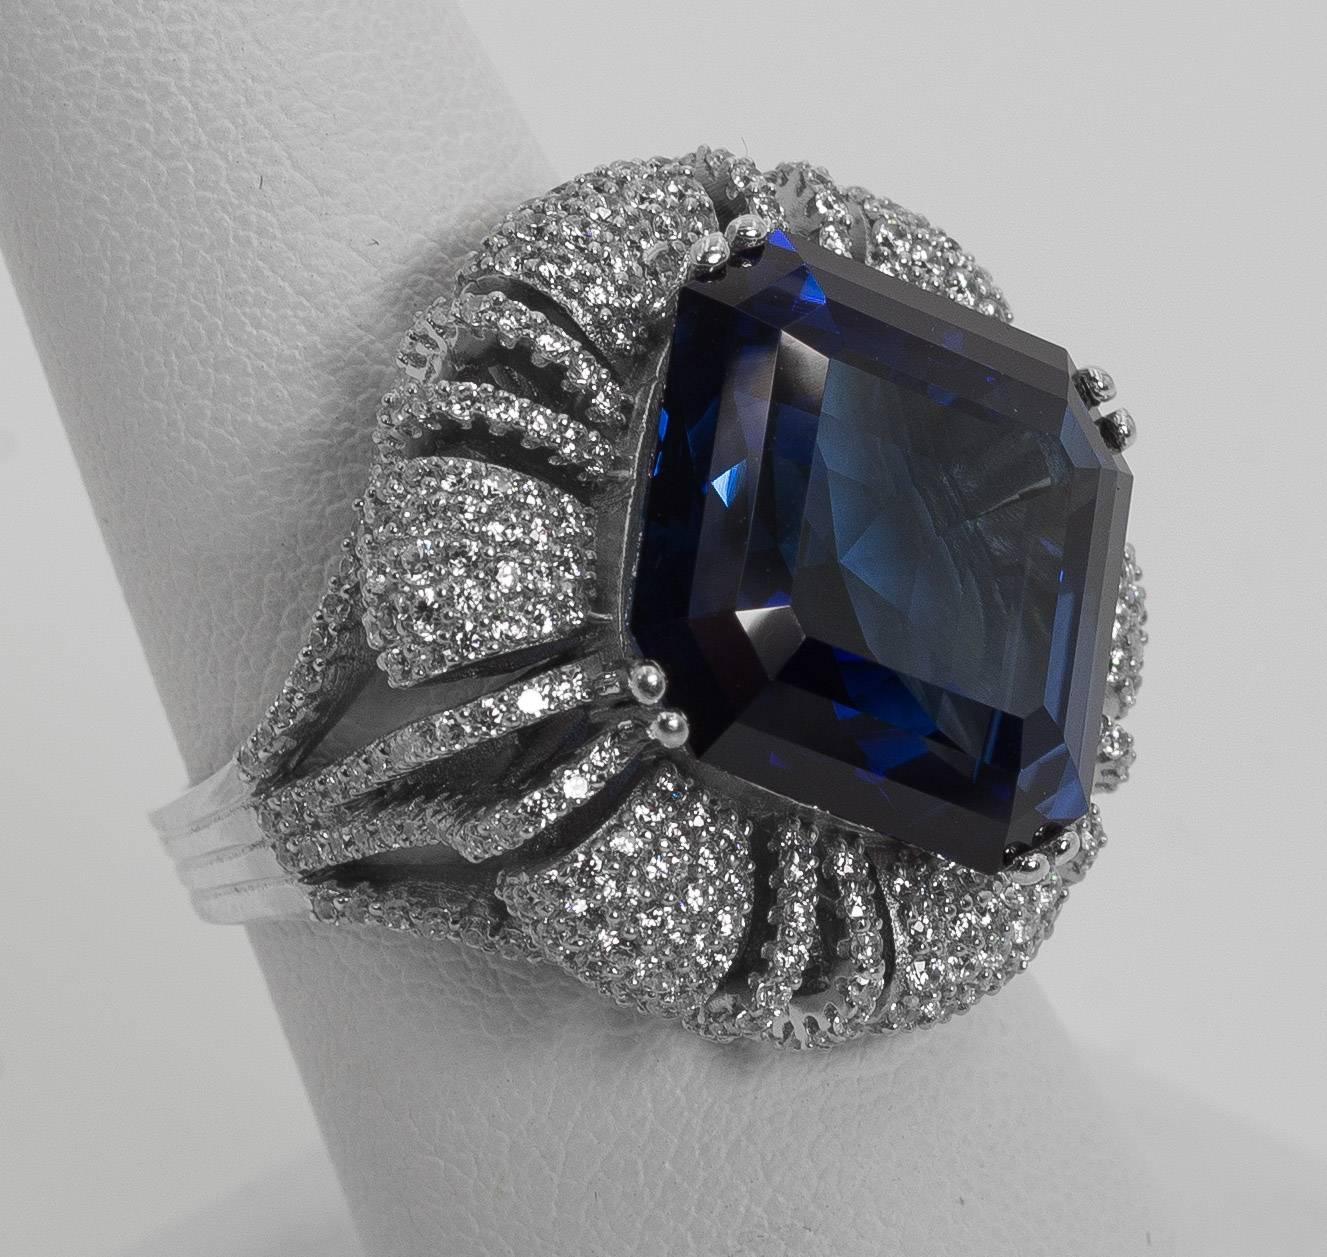 A 10 carat hand cut special emerald cut faux Kashmir color sapphire  nestled on a cushion of pave white cubic zirconia diamonds set in sterling designed to the highest fine standards possible. A classic amazing sparkly and brilliant look that will